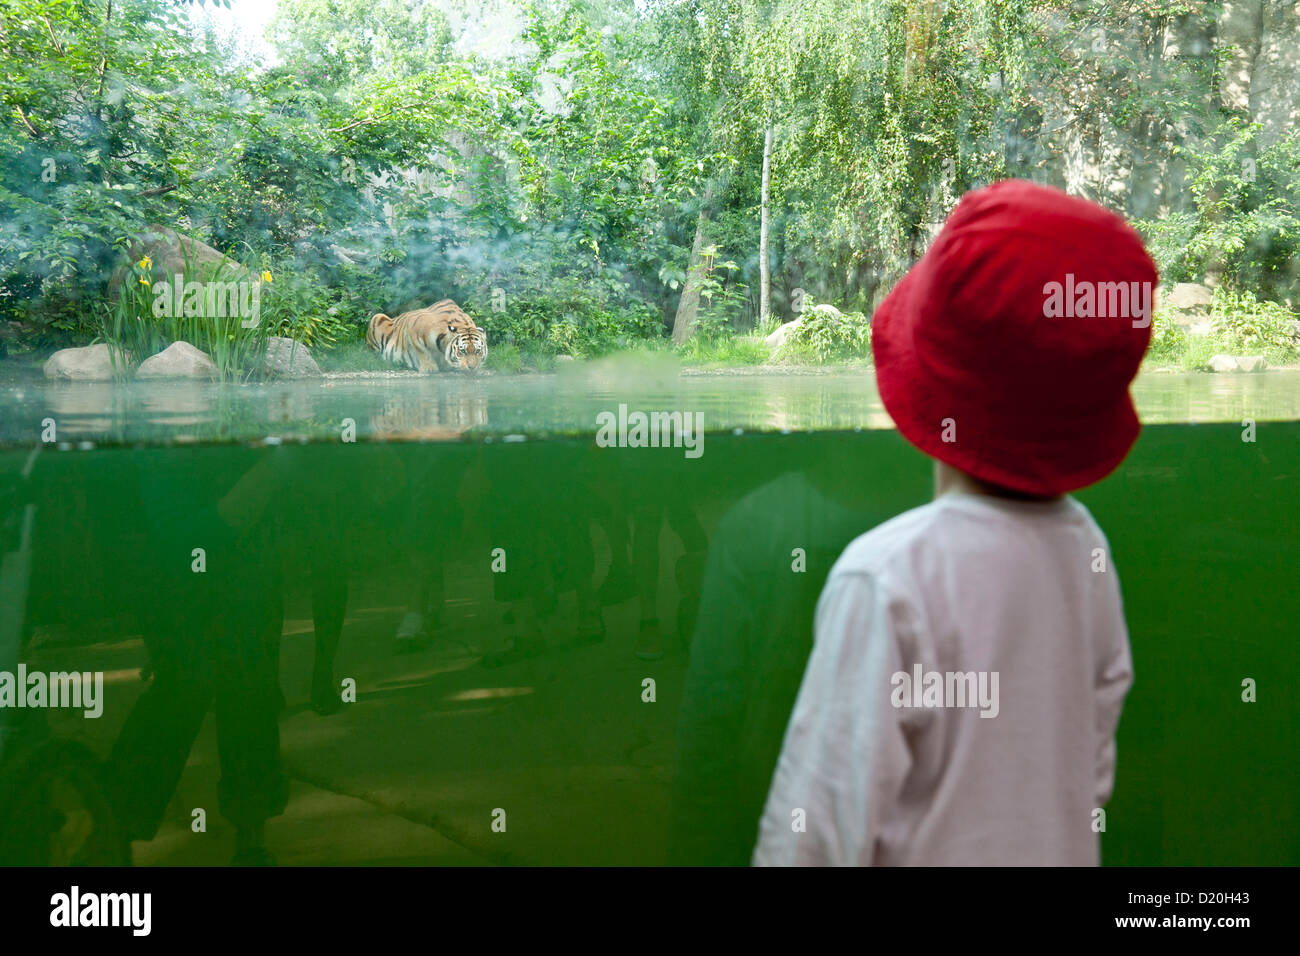 Children watching a tiger drinking, view through a glass panel, Leipzig Zoo, Leipzig, Saxony, Germany Stock Photo